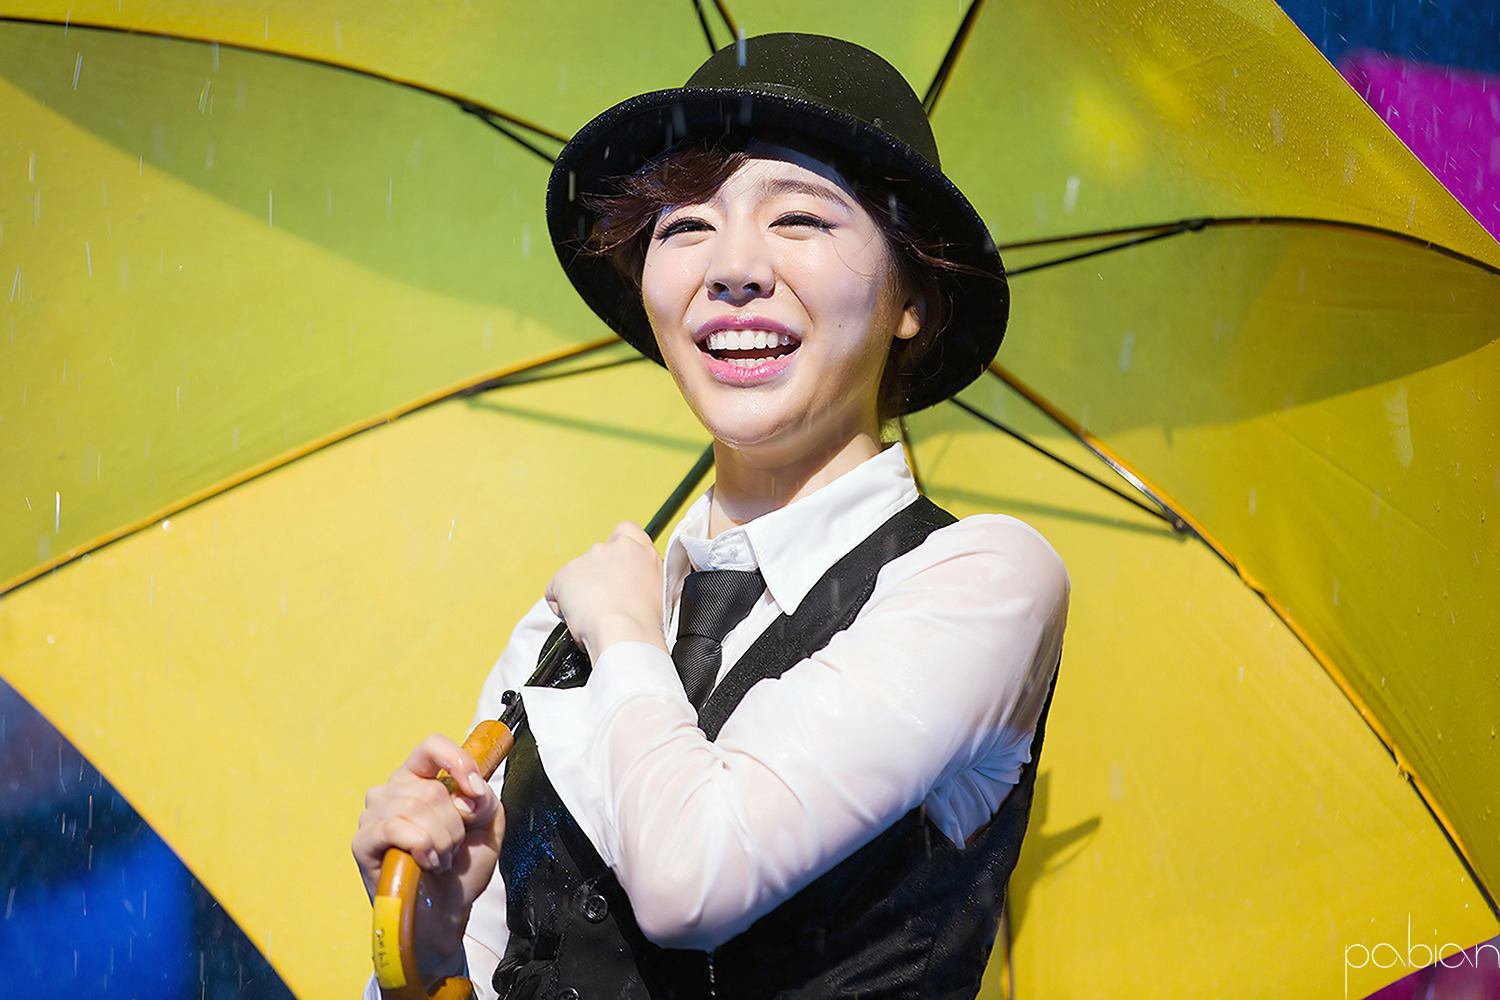 [OTHER][29-04-2014]Sunny sẽ tham gia vở nhạc kịch "SINGIN' IN THE RAIN" - Page 2 276A1847539E715401D814